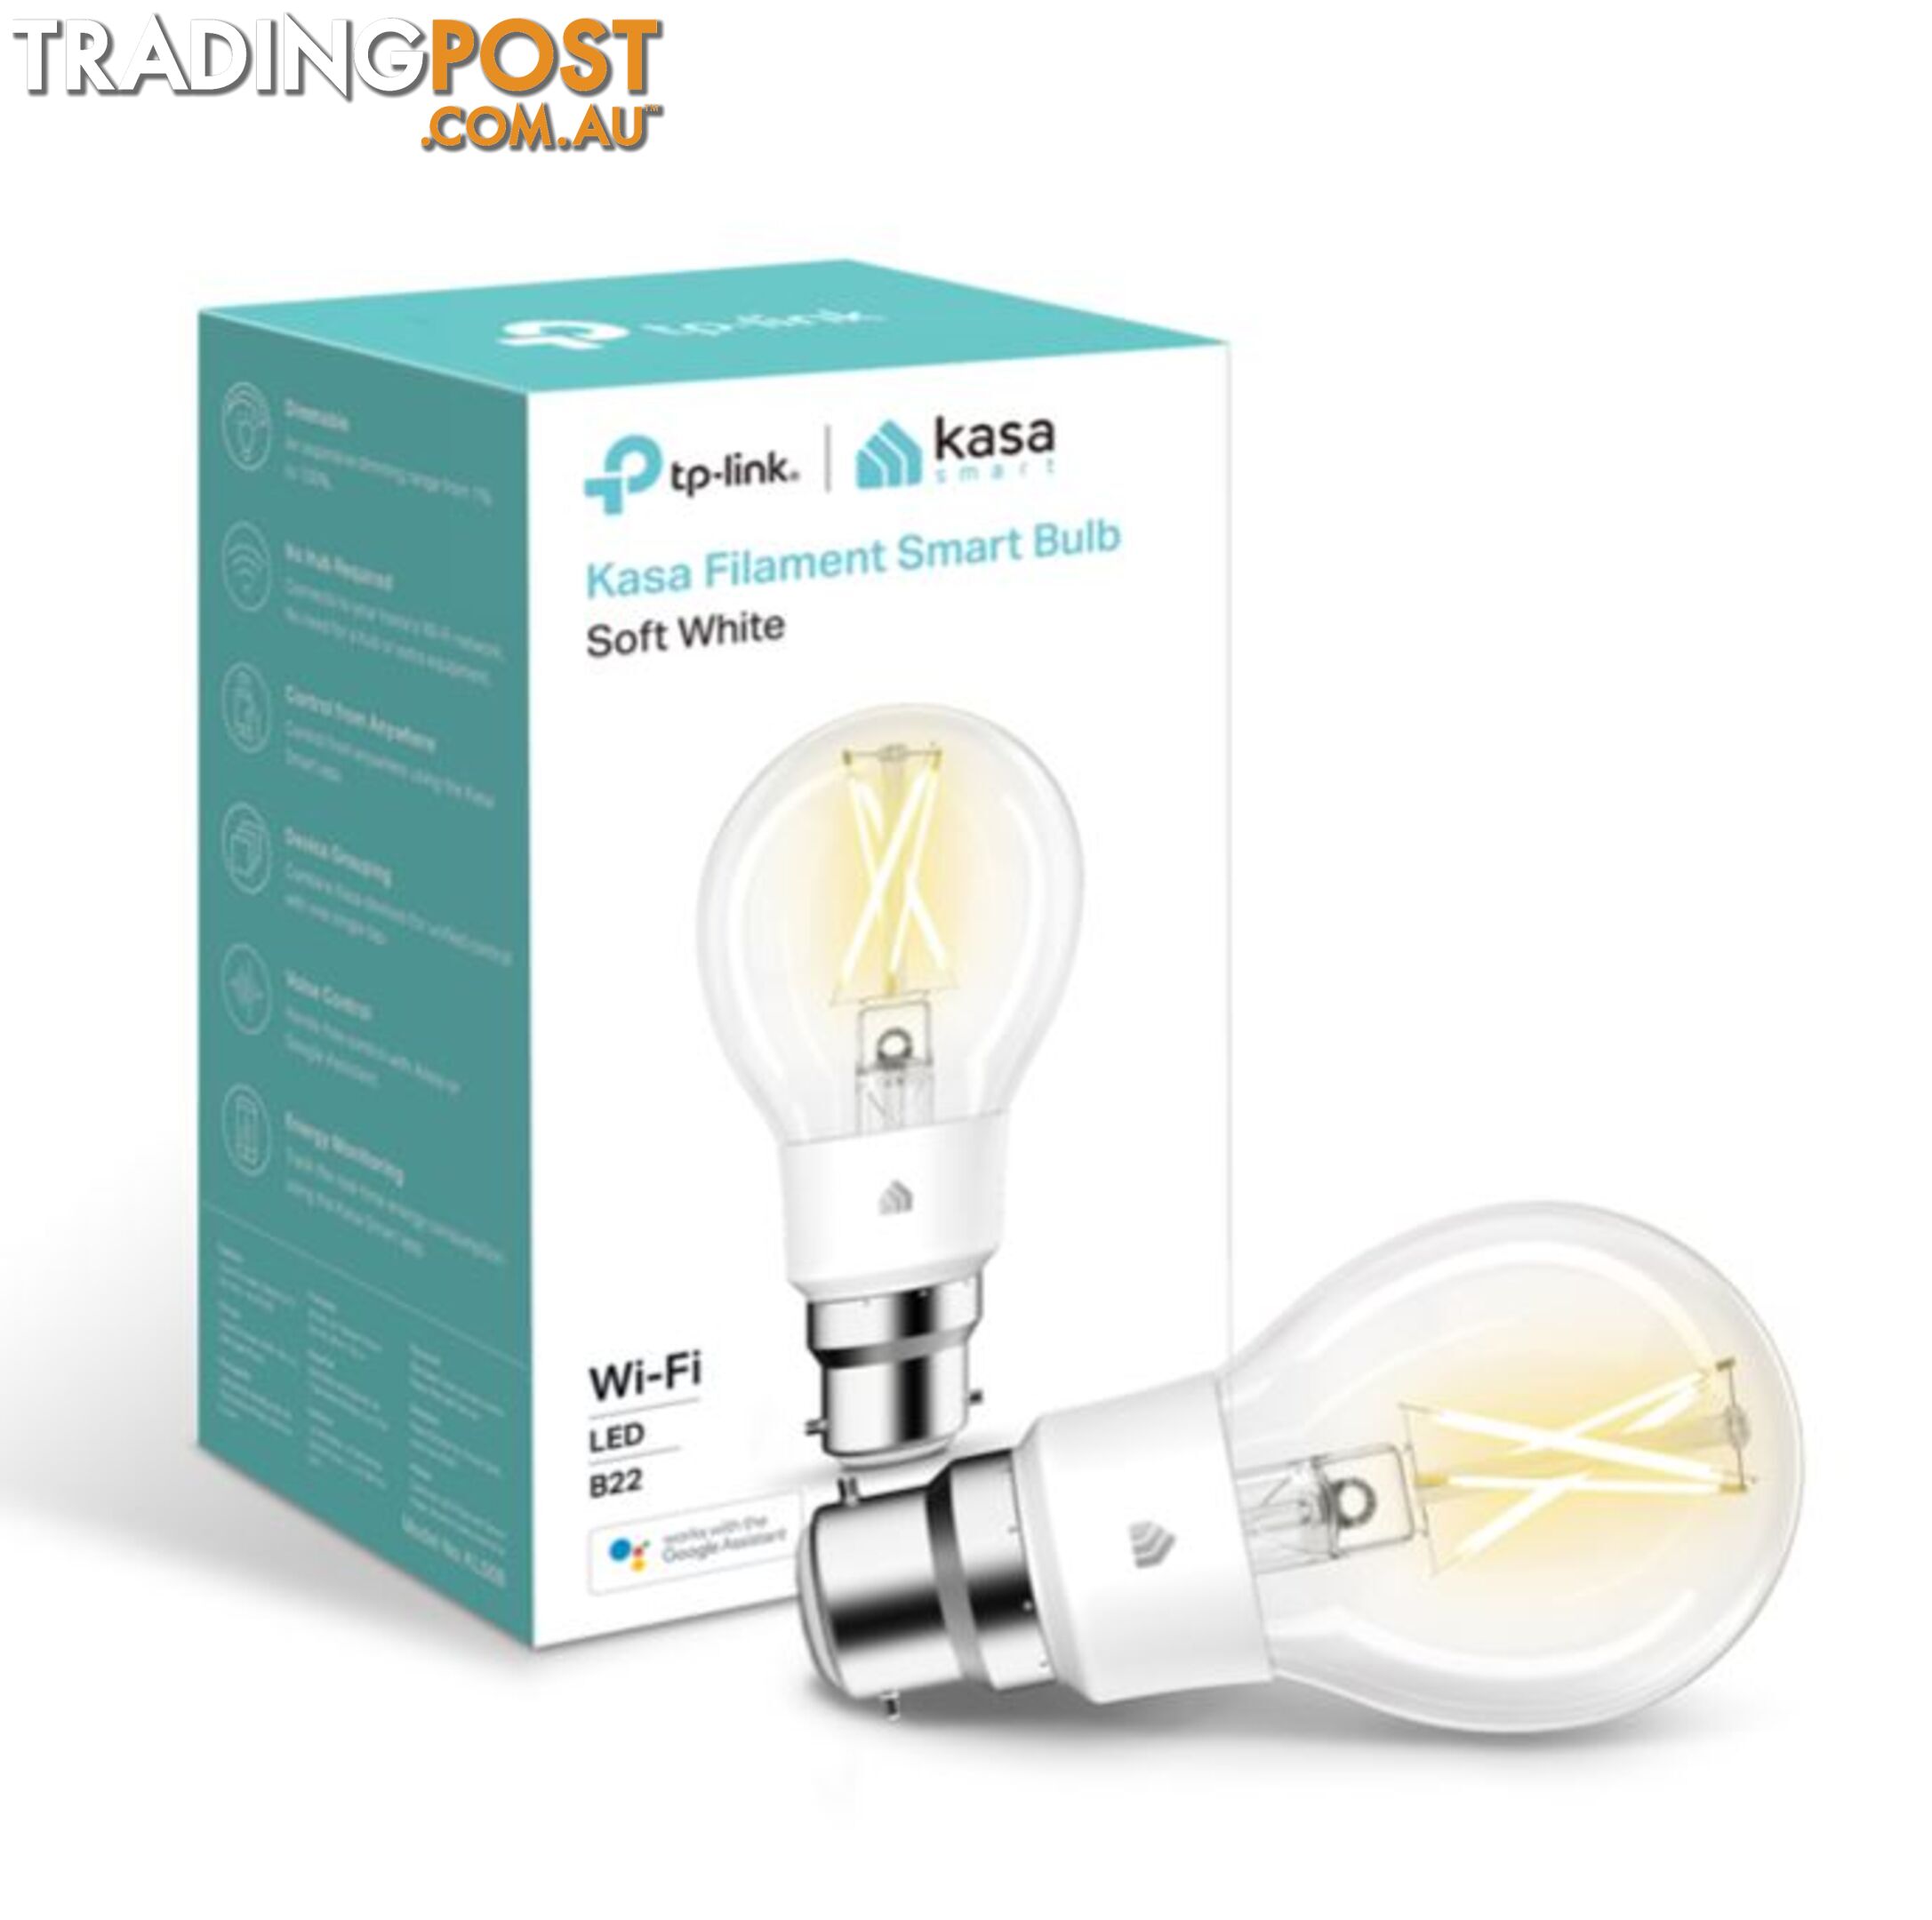 TP-Link KL50B Kasa Filament Smart Bulb, Soft White, Bayonet, Dimmable, No Hub Required, Voice Control, 2700K, 7kWh/1000h, 2.4 GHz, 2 Year Warranty - HETL-KL50B